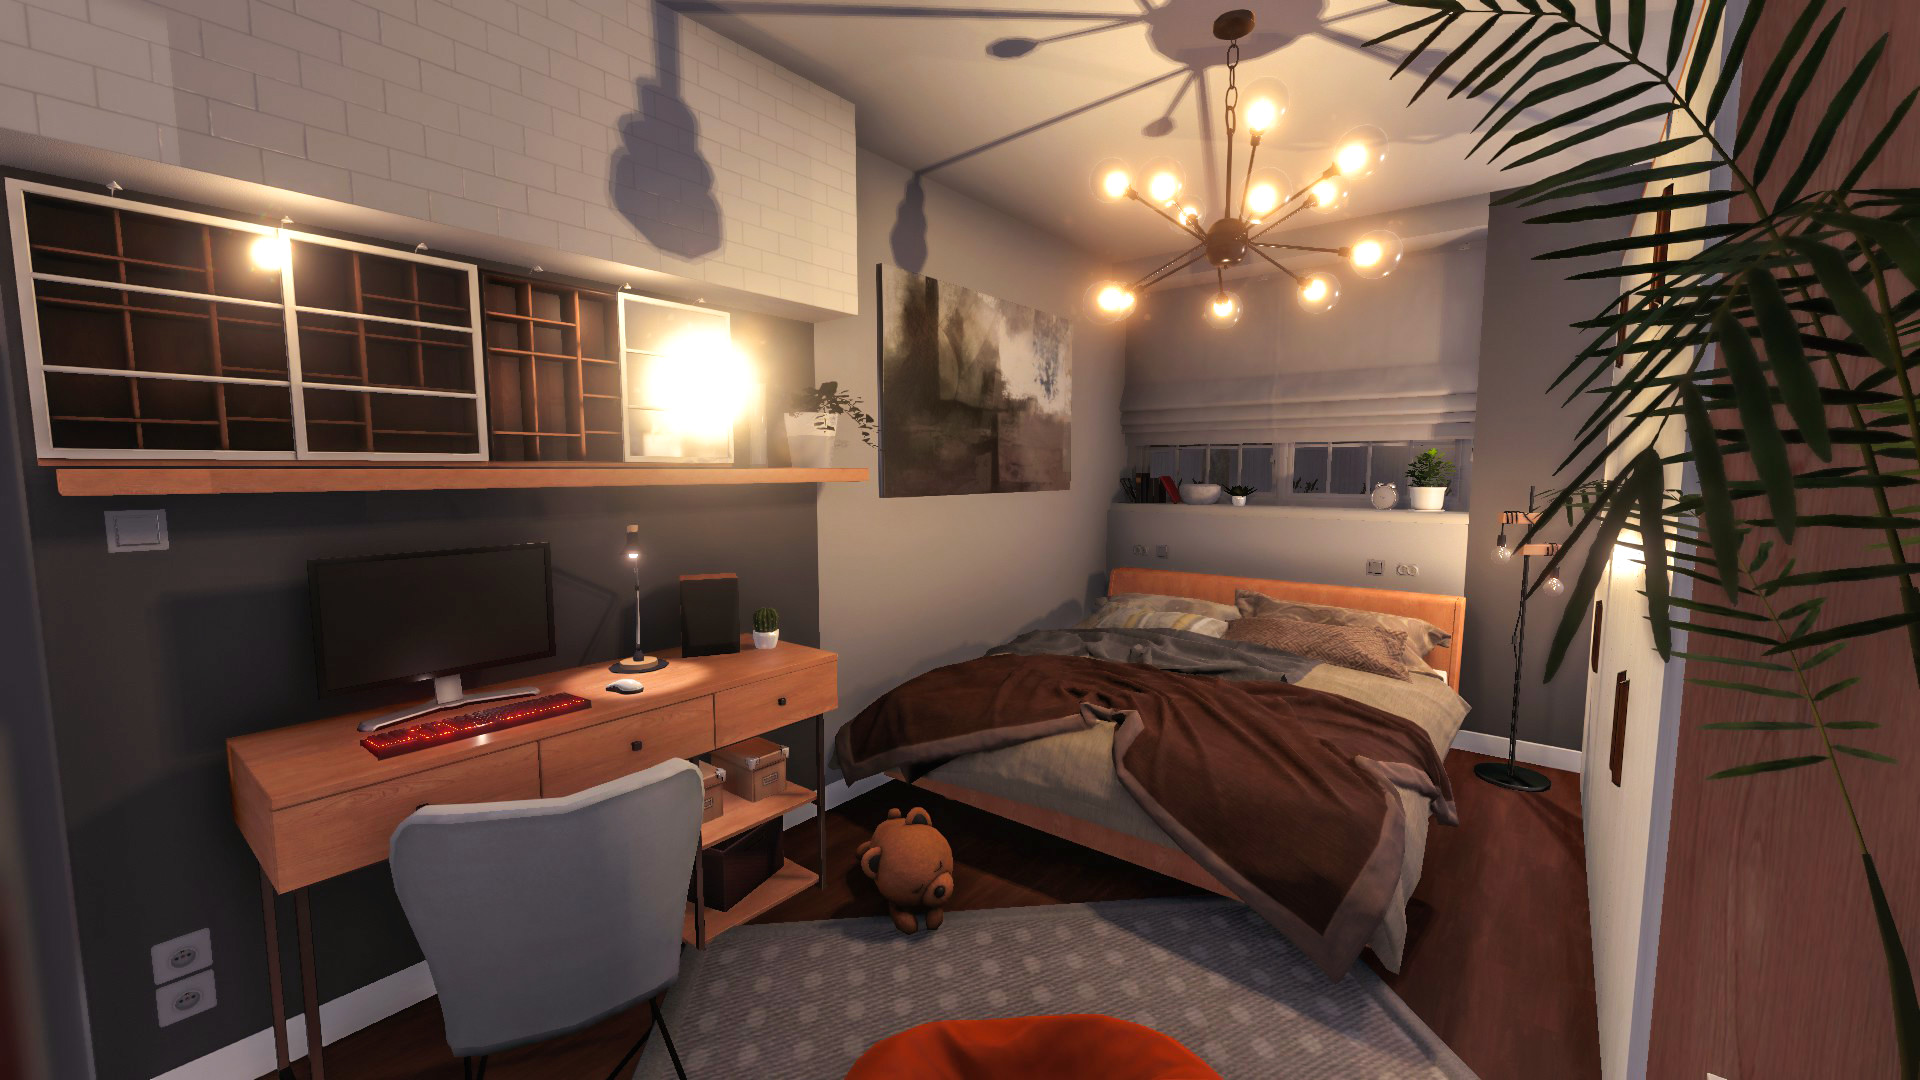 house flipper pc game download easy